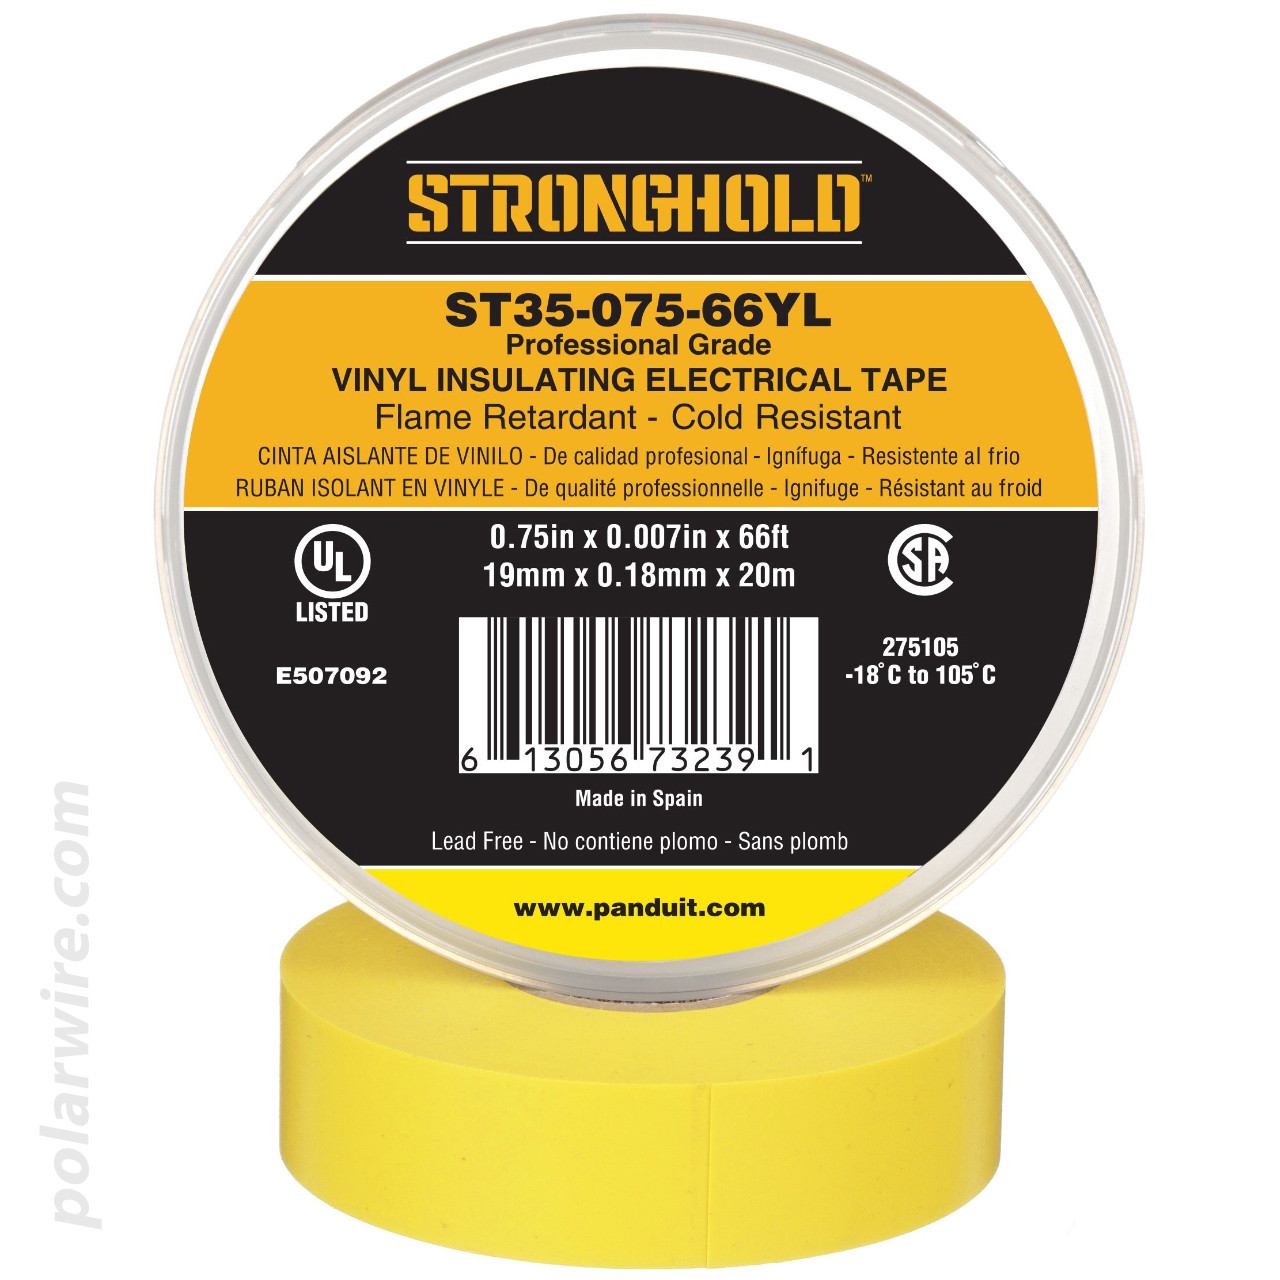 3/4 inch Yellow PVC Vinyl Professional Grade Electrical Tape Panduit Stronghold